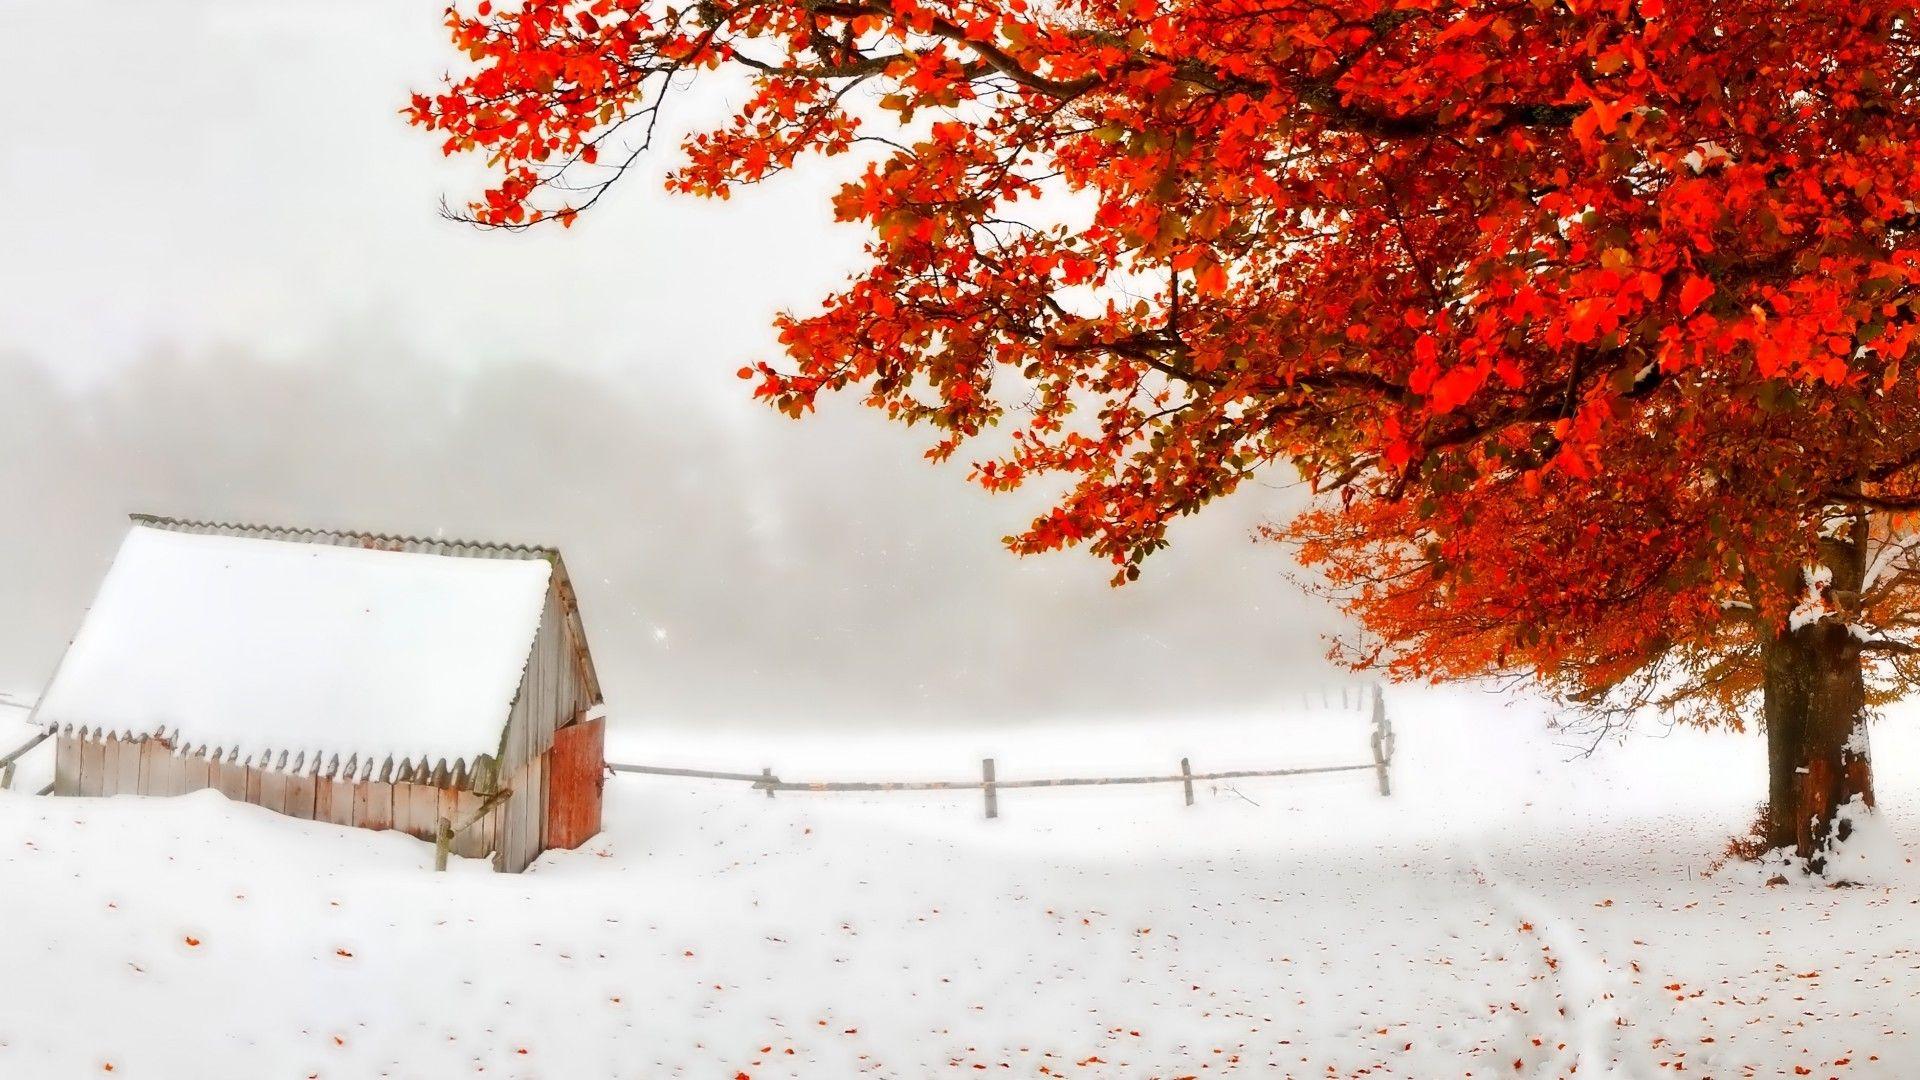 Storm Shack Tree Red Snow Leaves Early Autumn Countryside Winter Wallpaper For Desktop Background. Winter wallpaper, Free winter wallpaper, Winter trees